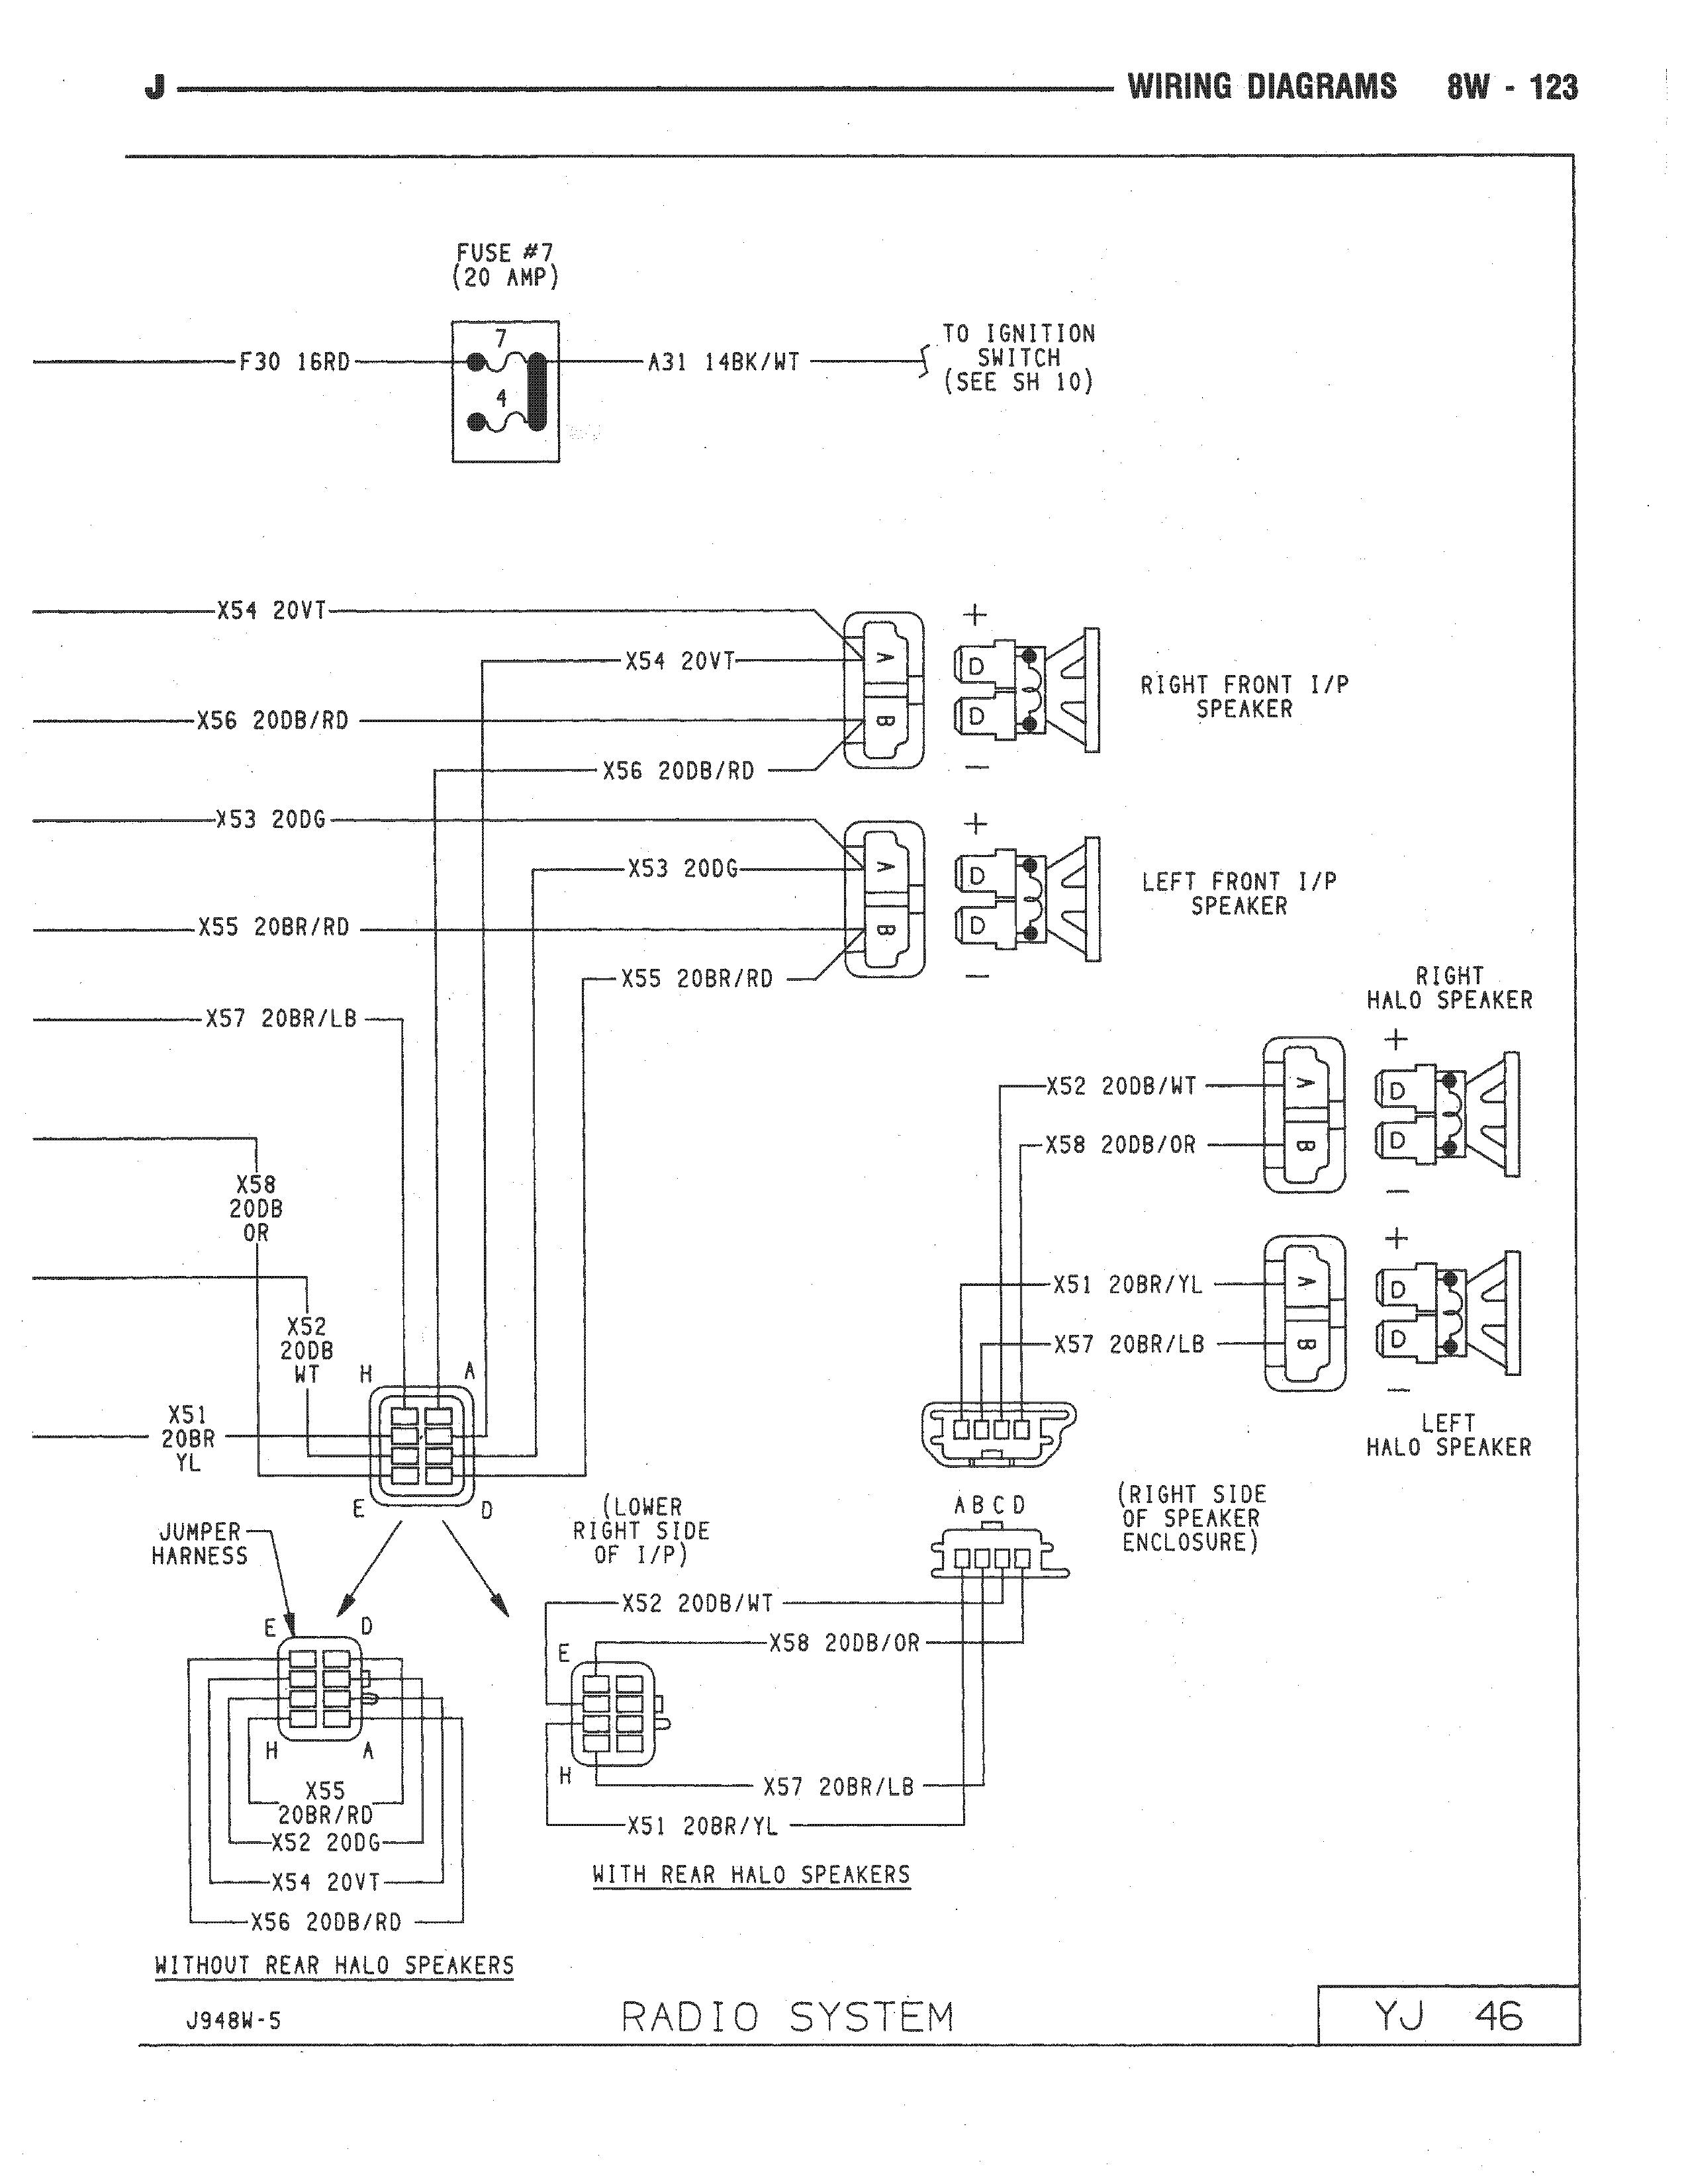 1999 jeep wrangler stereo wiring wiring diagram mega 1999 jeep wrangler stereo wiring wiring diagram compilation